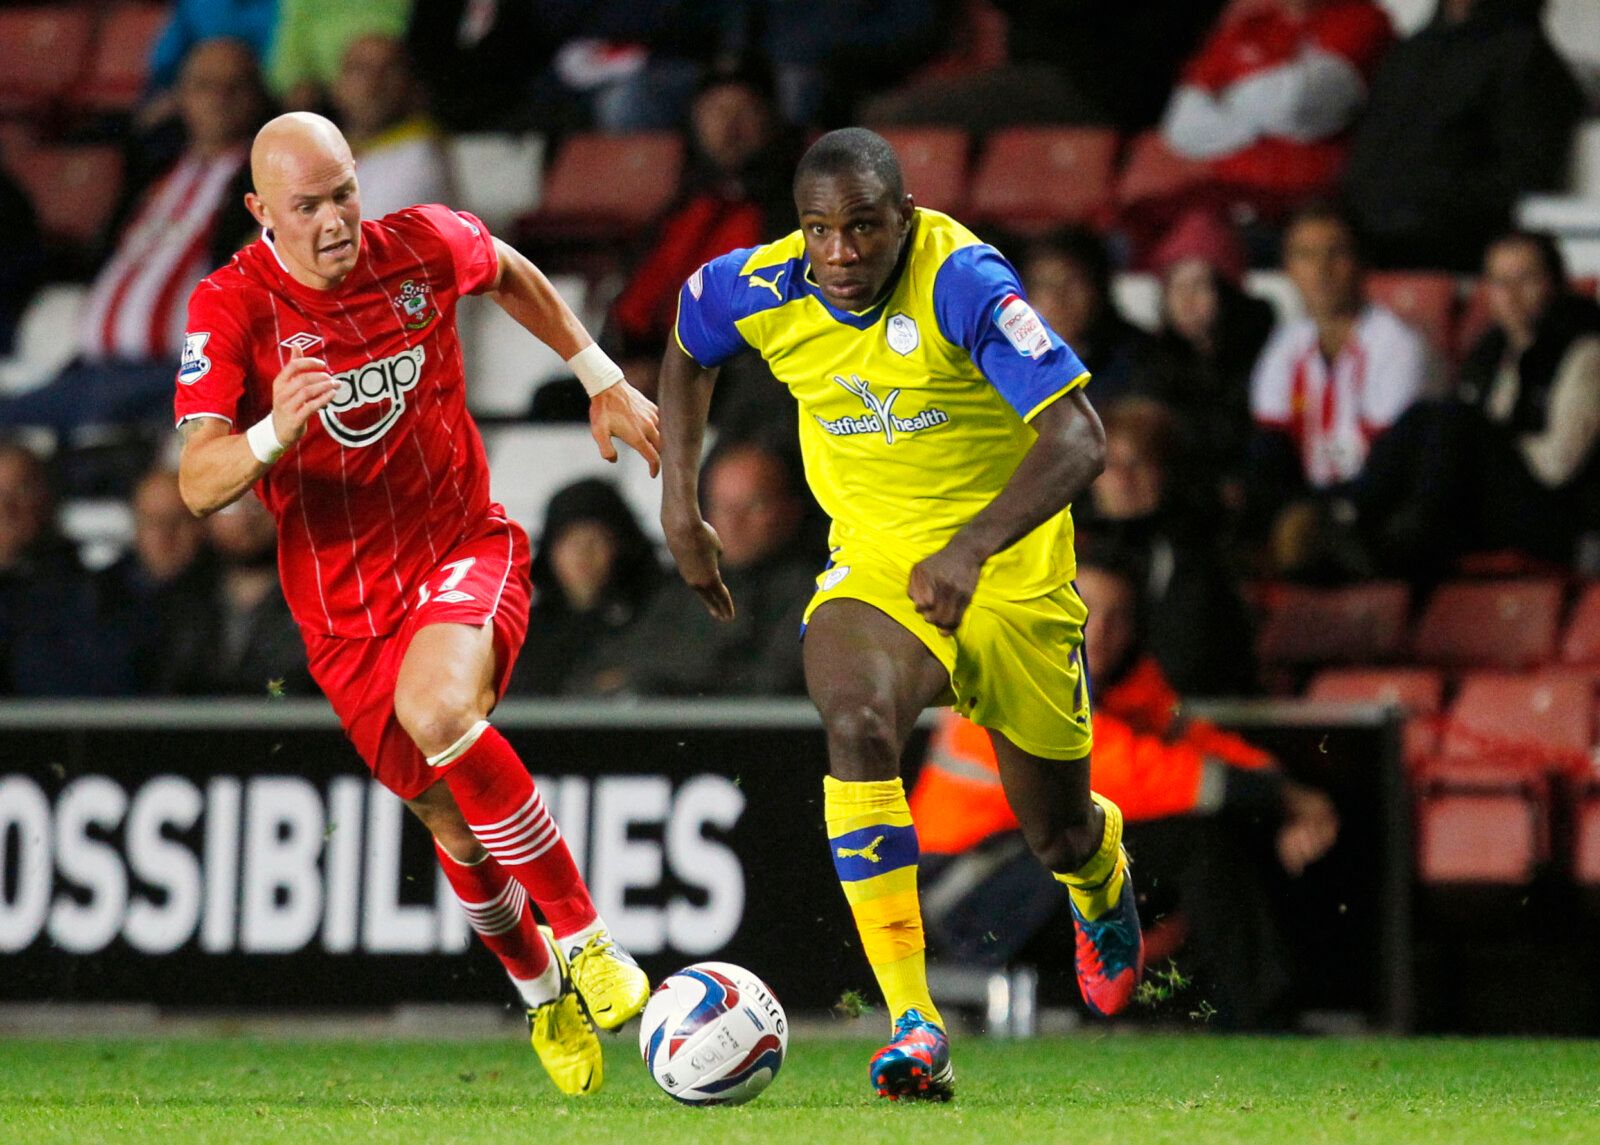 Football - Southampton v Sheffield Wednesday - Capital One Cup Third Round  - St Mary's Stadium - 25/9/12 
Southampton's Richard Chaplow (L) in action with Sheffield Wednesday's Michail Antonio  
Mandatory Credit: Action Images / James Benwell 
Livepic  
EDITORIAL USE ONLY. No use with unauthorized audio, video, data, fixture lists, club/league logos or live services. Online in-match use limited to 45 images, no video emulation. No use in betting, games or single club/league/player publications.